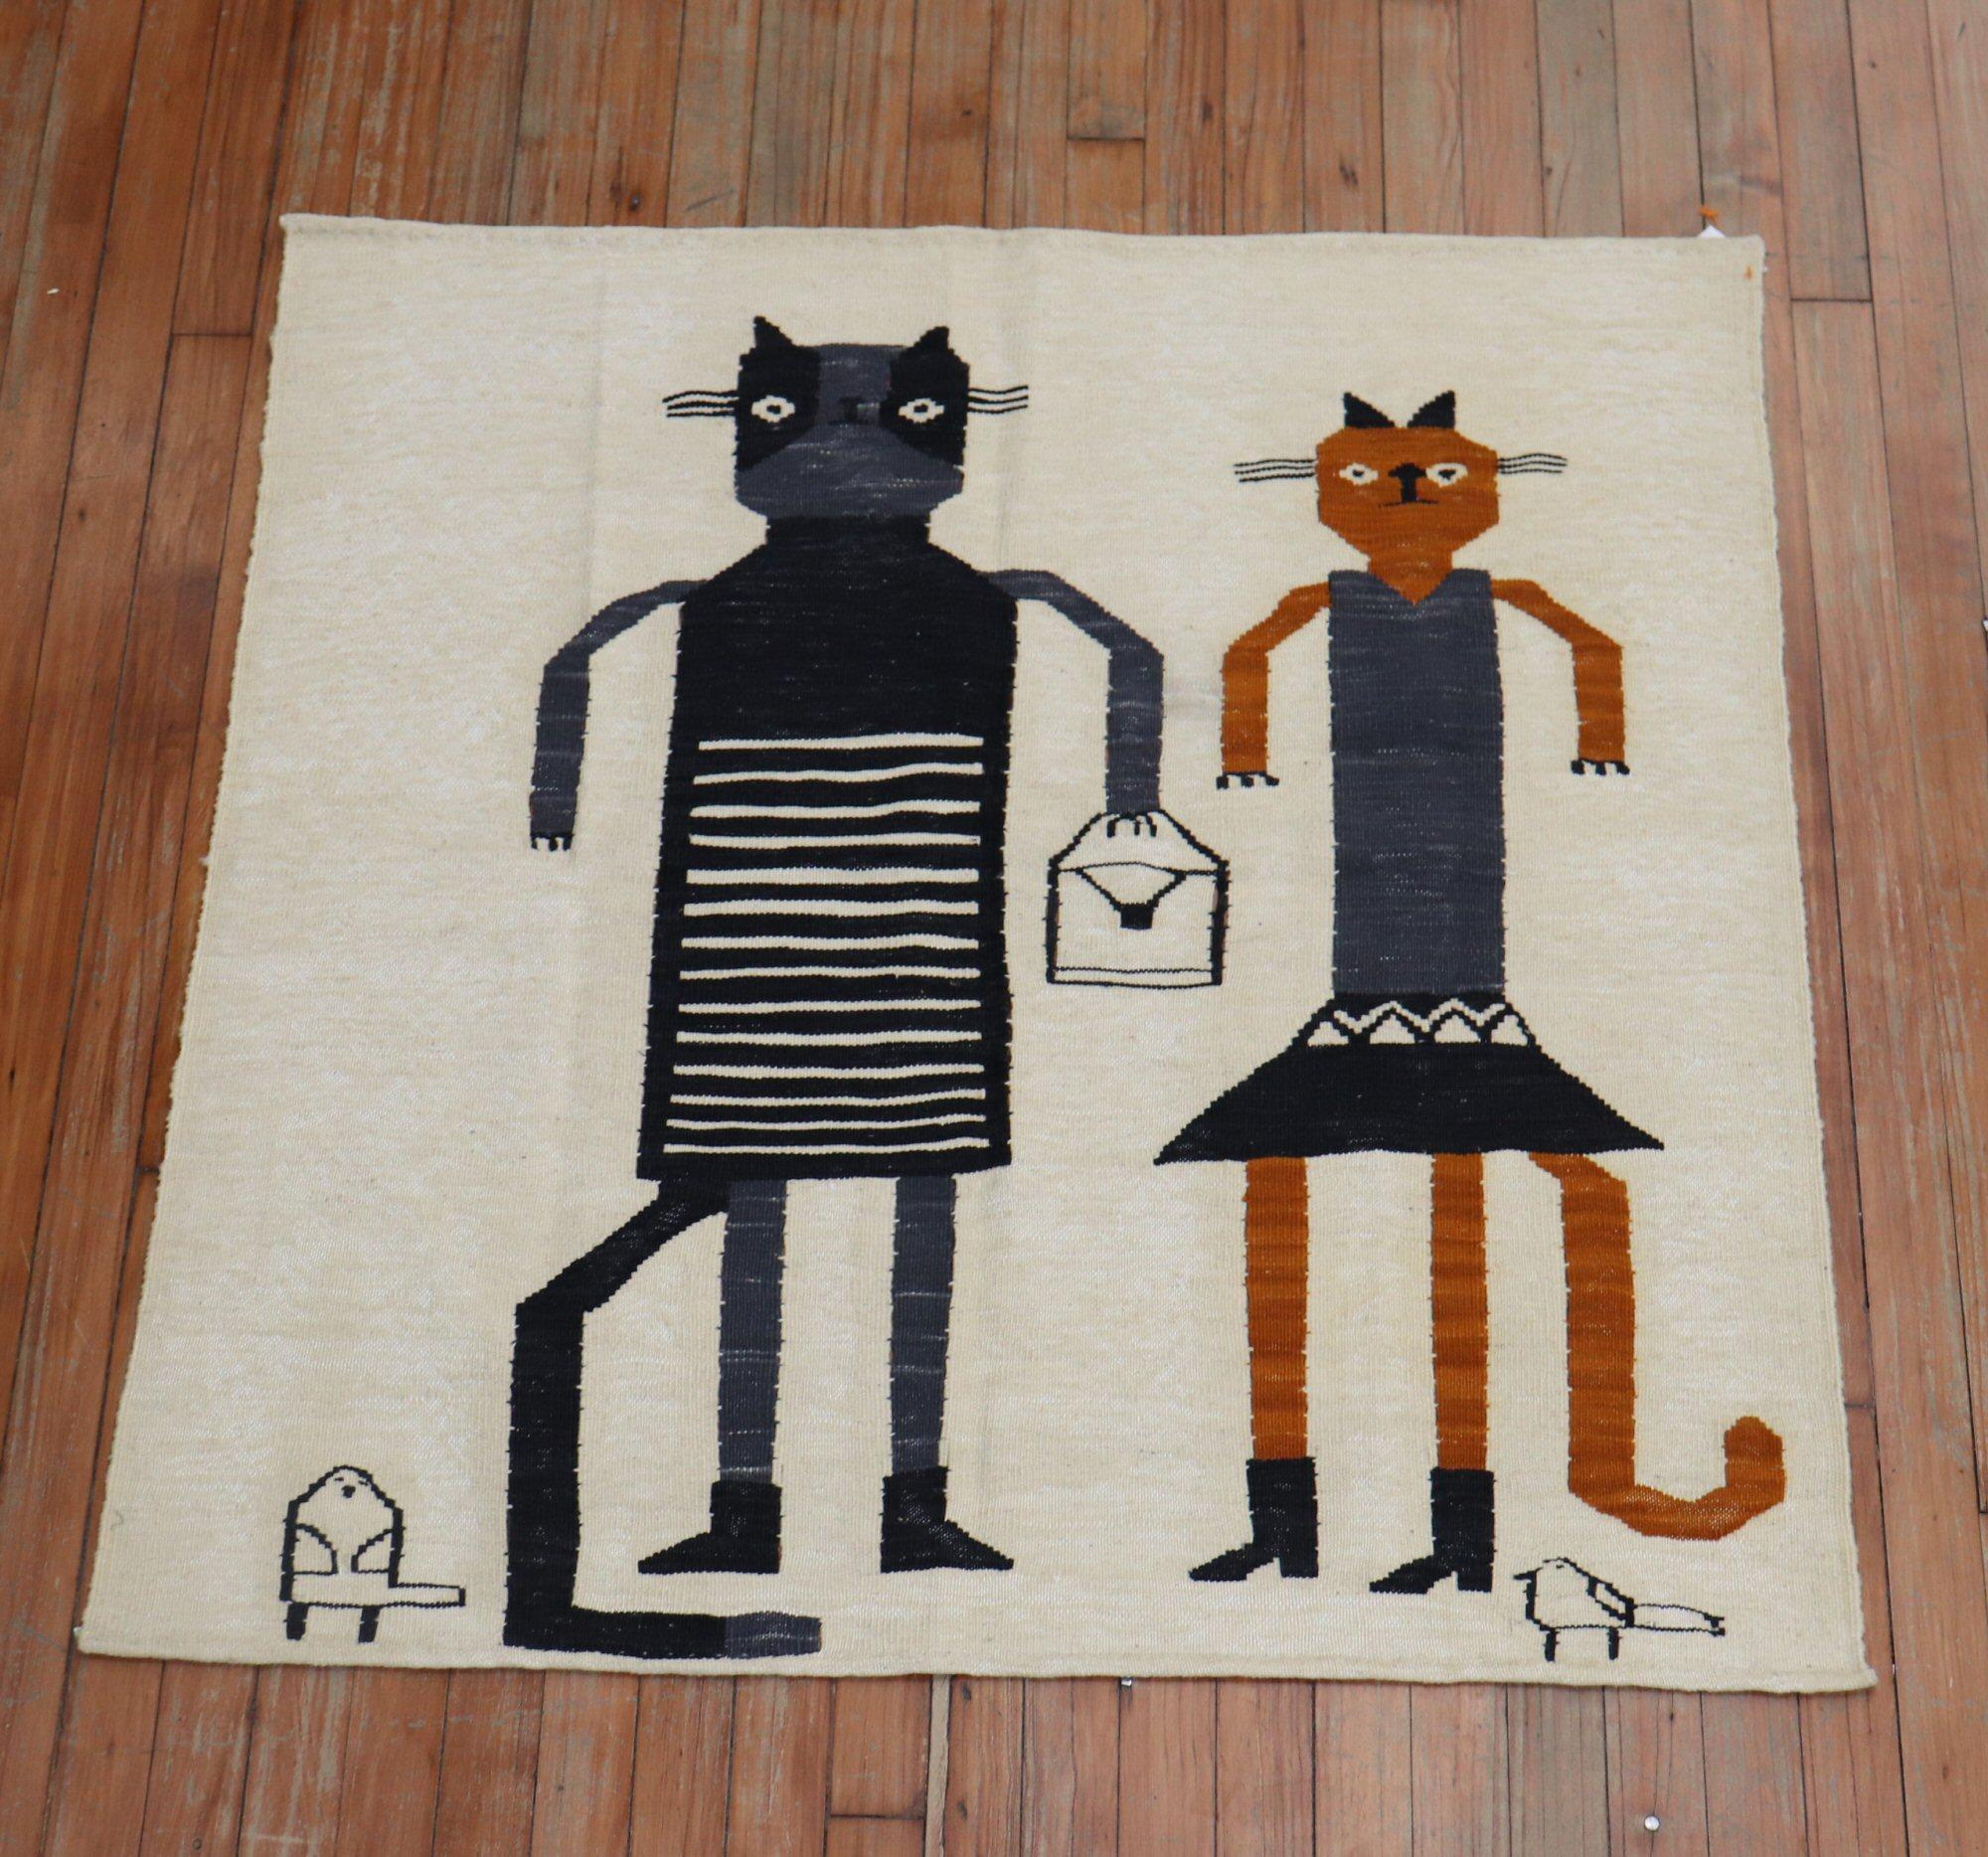 Square scatter size Persian Kilim from the 20th century with 2 cats going on a shopping adventure together on a beige field. This was originally belonging to a private Persian collector who requested to make a custom collection of flat-weaves with